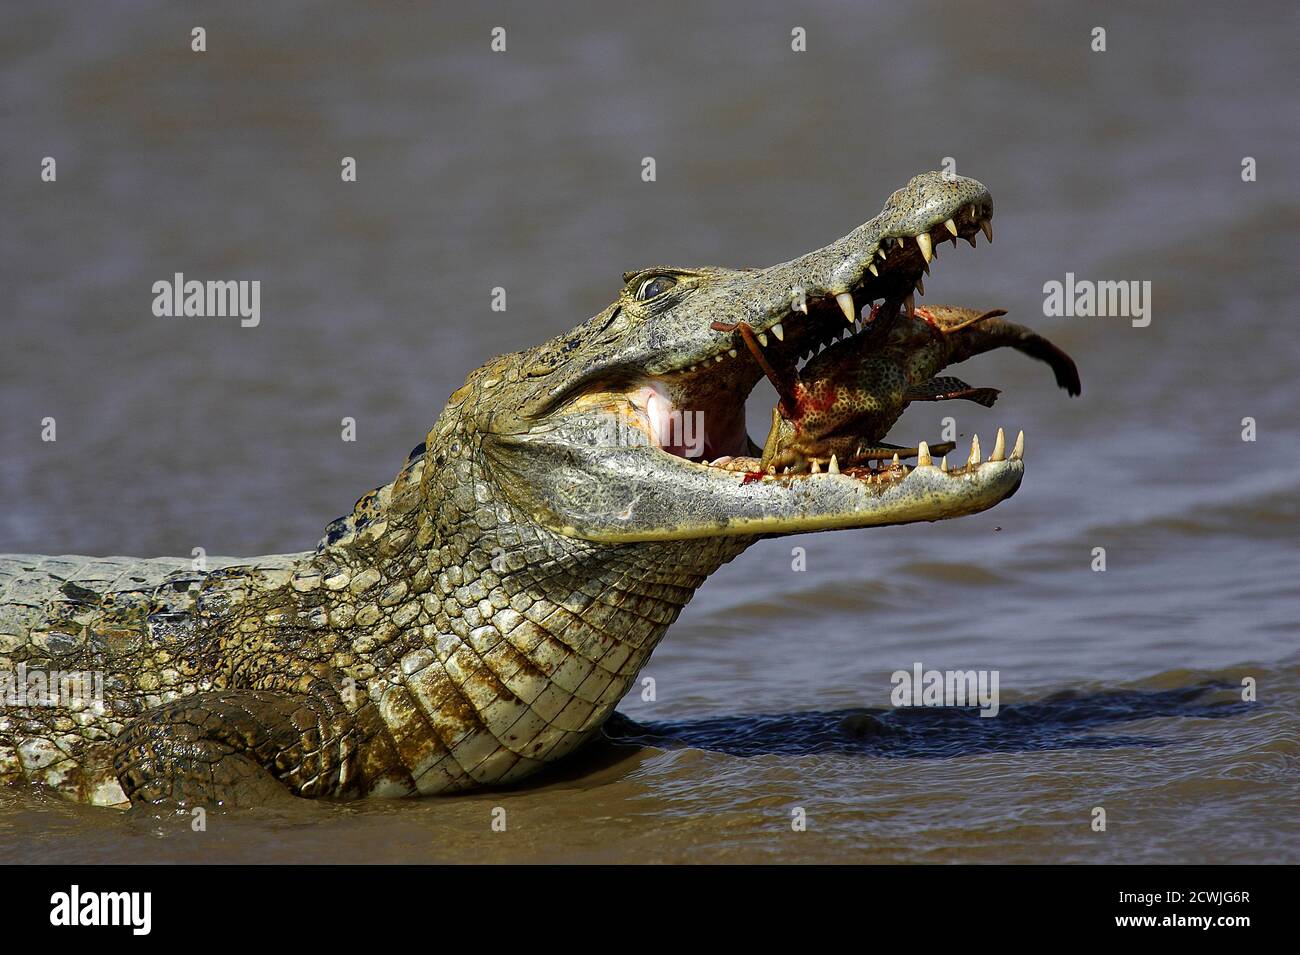 Spectacled Caiman, caiman crocodilus, Adult Catching Fish, Los Lianos in Venezuela Stock Photo